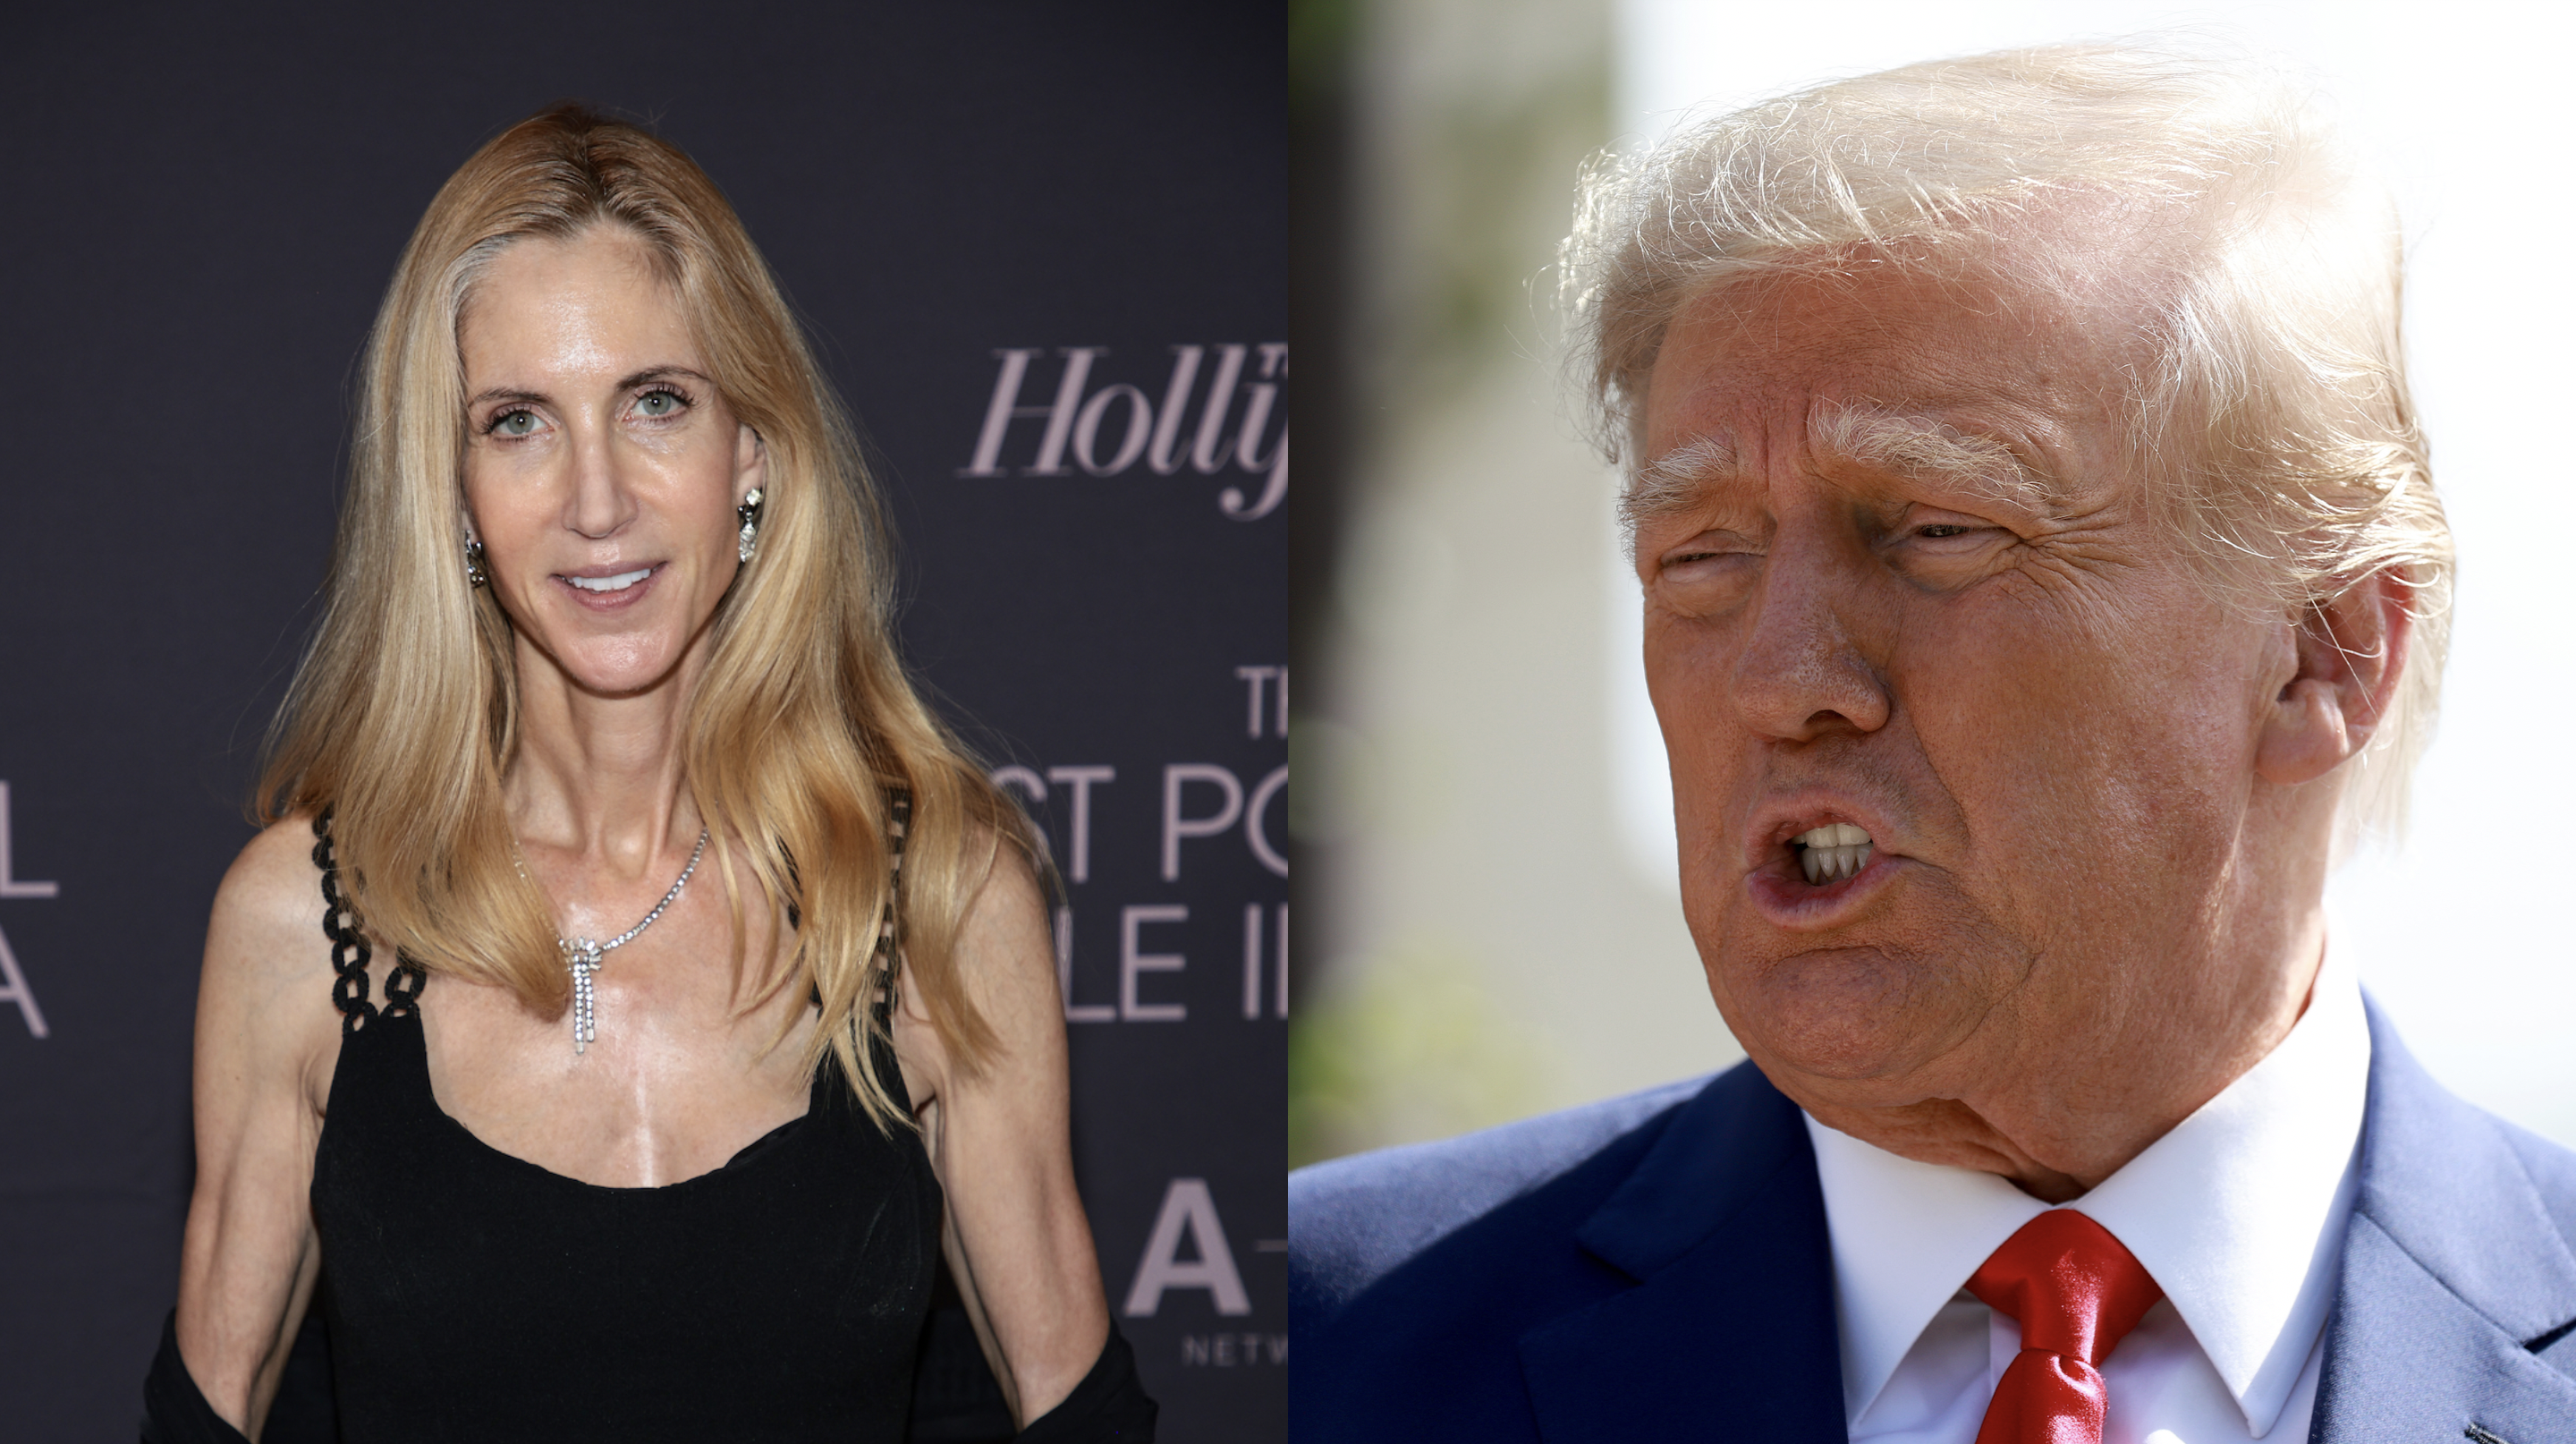 Right-Wing Pundit Ann Coulter Dismisses 'RINO' Trump, Says 'He's So Done'